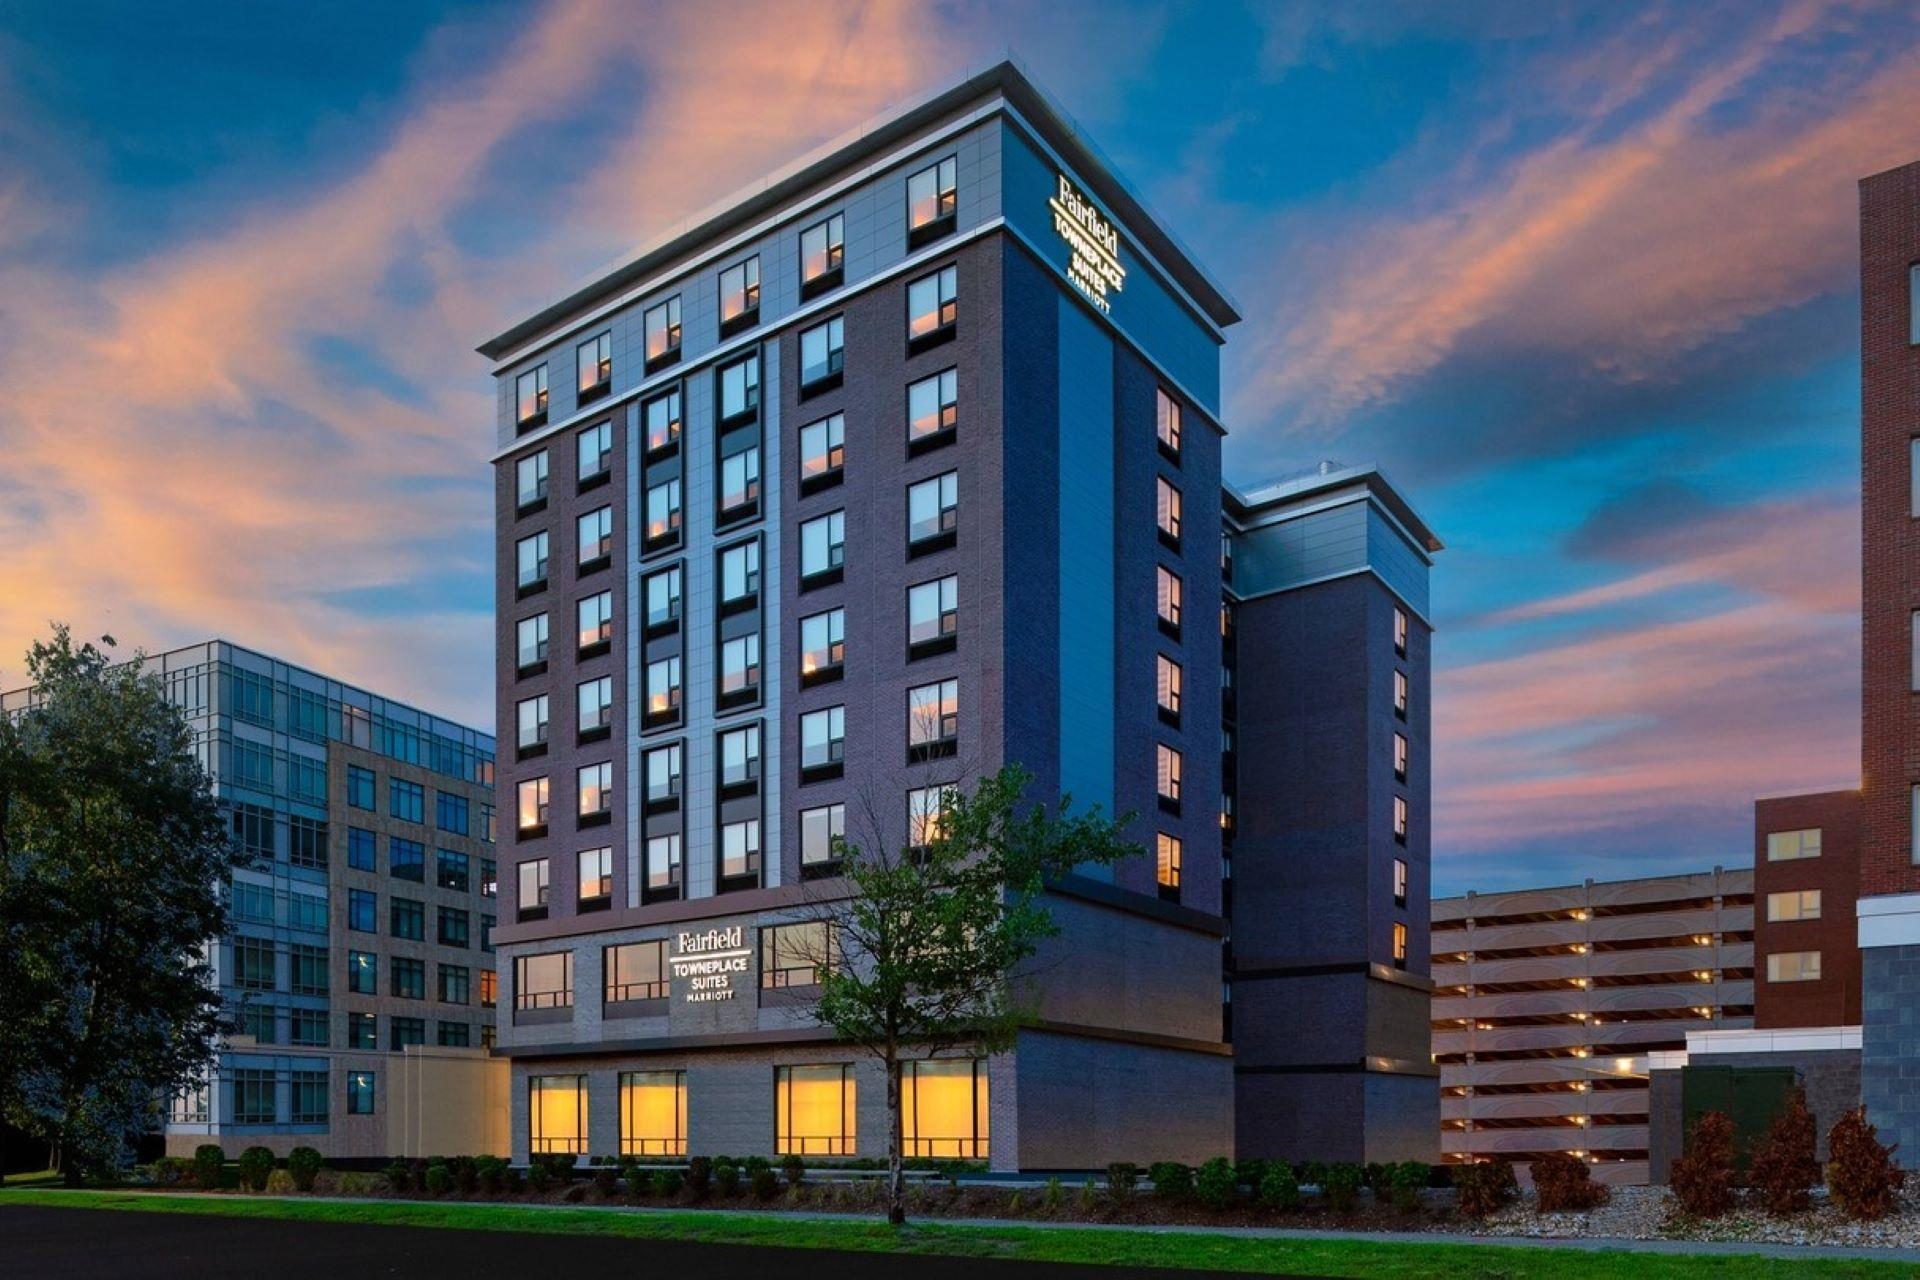 TownePlace Suites Boston Medford in Medford, MA